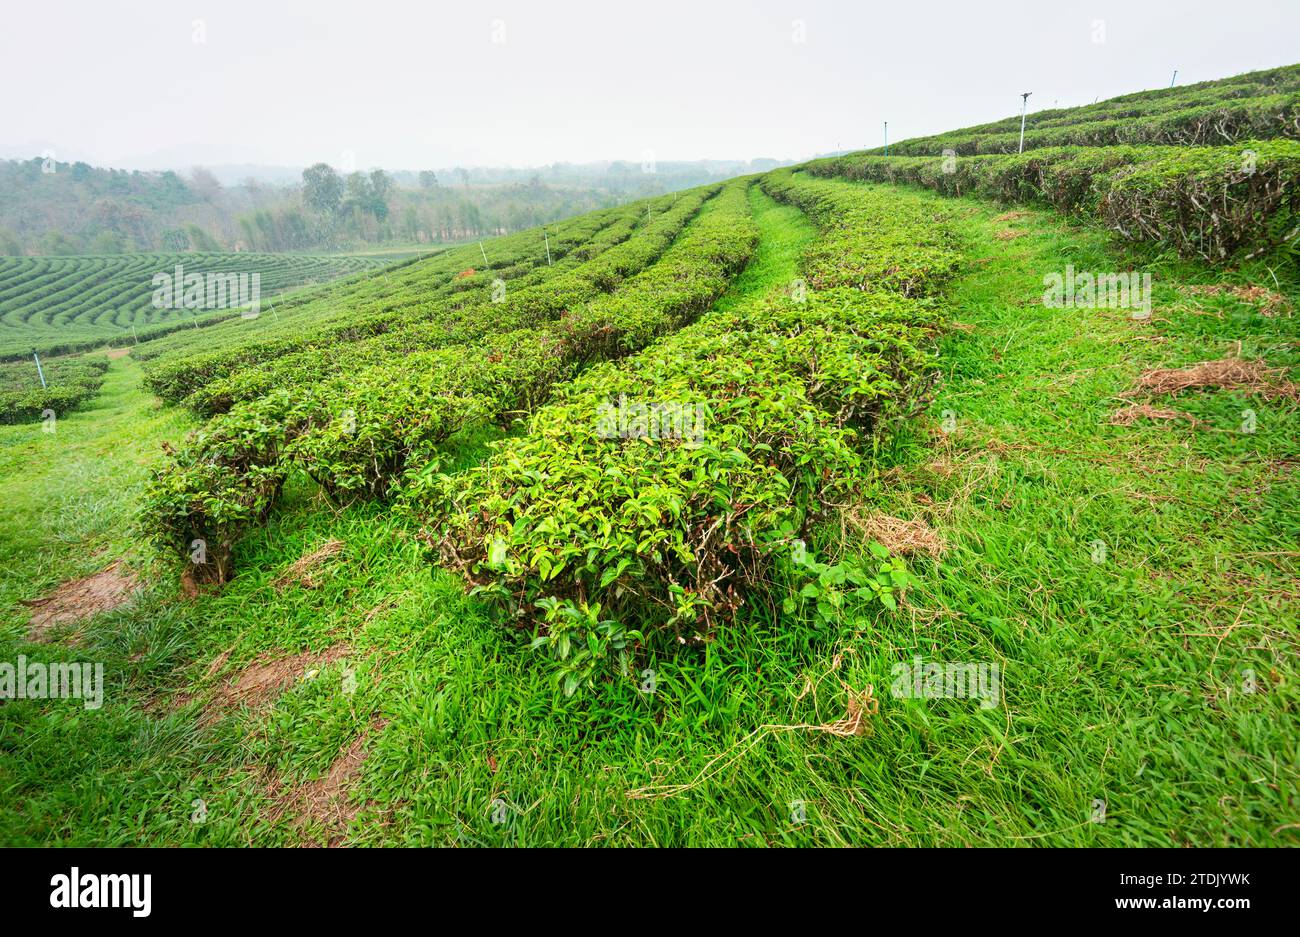 Hundreds of rows of lush Thai tea plants,regularily sprinkled with water to keep healthy,in one of Thailand's big tea growing areas. A hazy,smokey lan Stock Photo